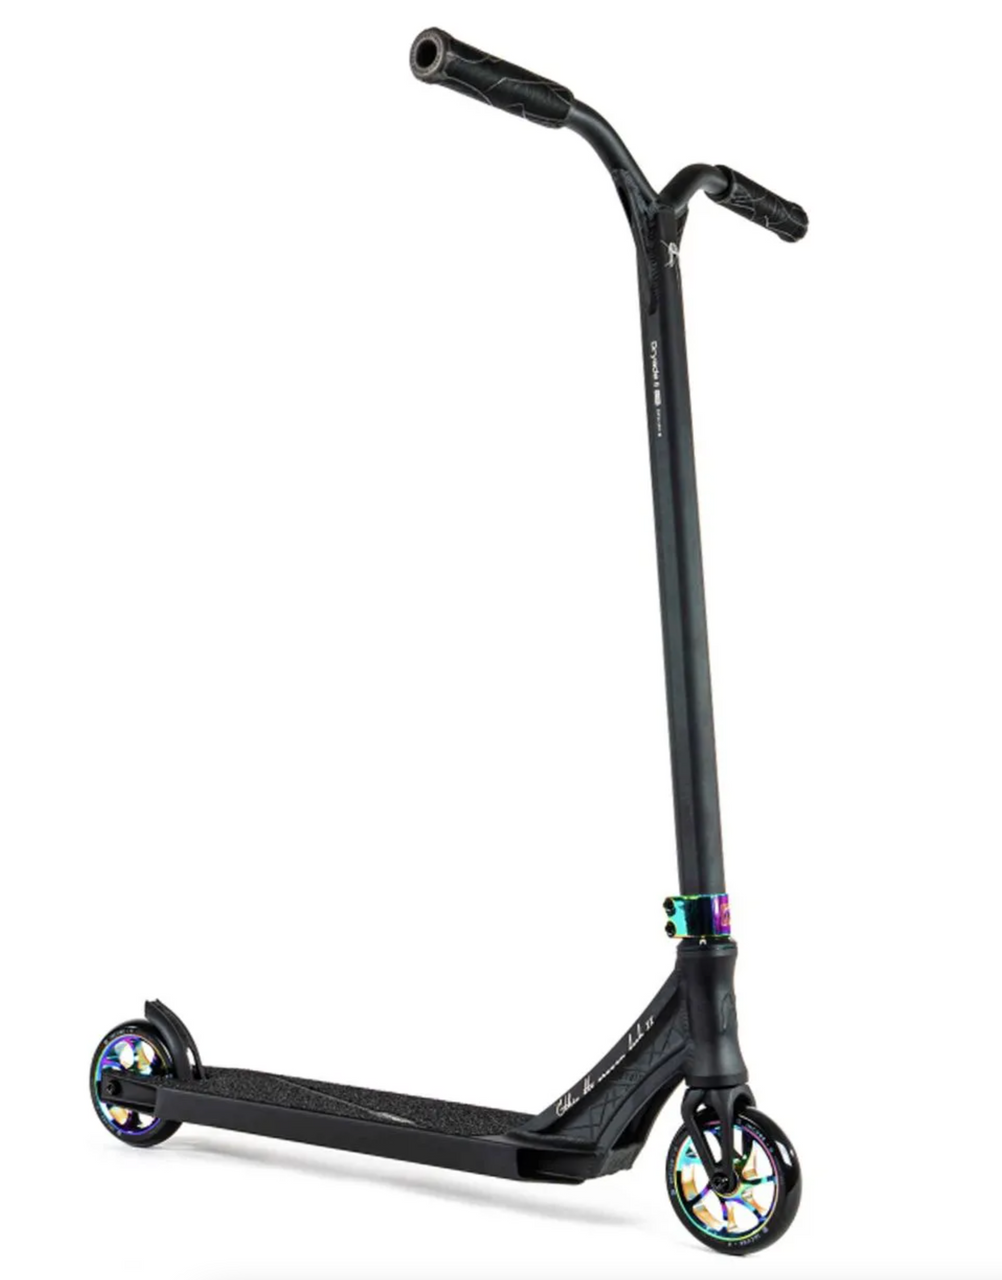 Ethic Erawan V2 Pro Scooter Complete - Neo Chrome